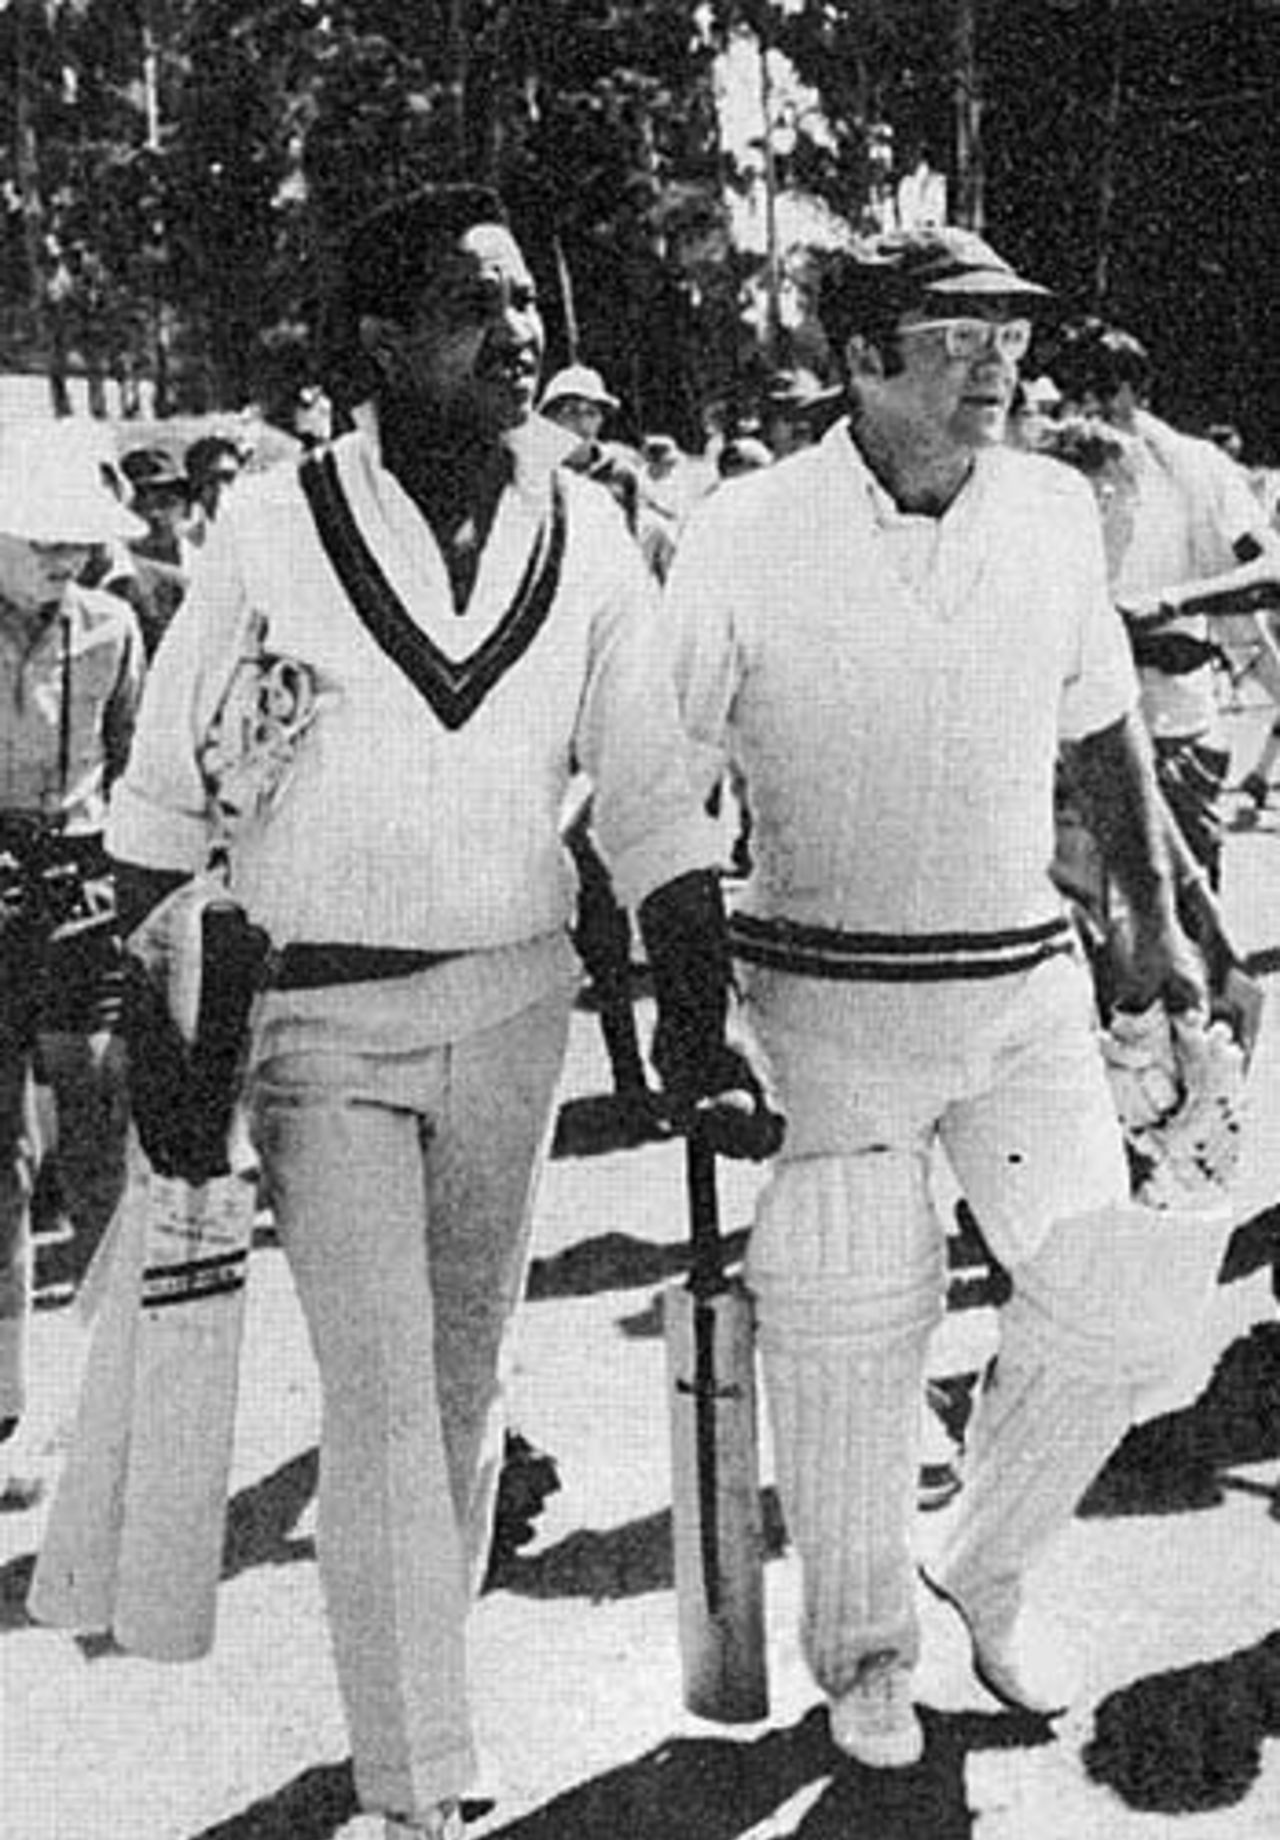 Garry Sobers with Eddie Barlow during his controversial appearance in a double-wicket competition in Rhodesia, September 1970